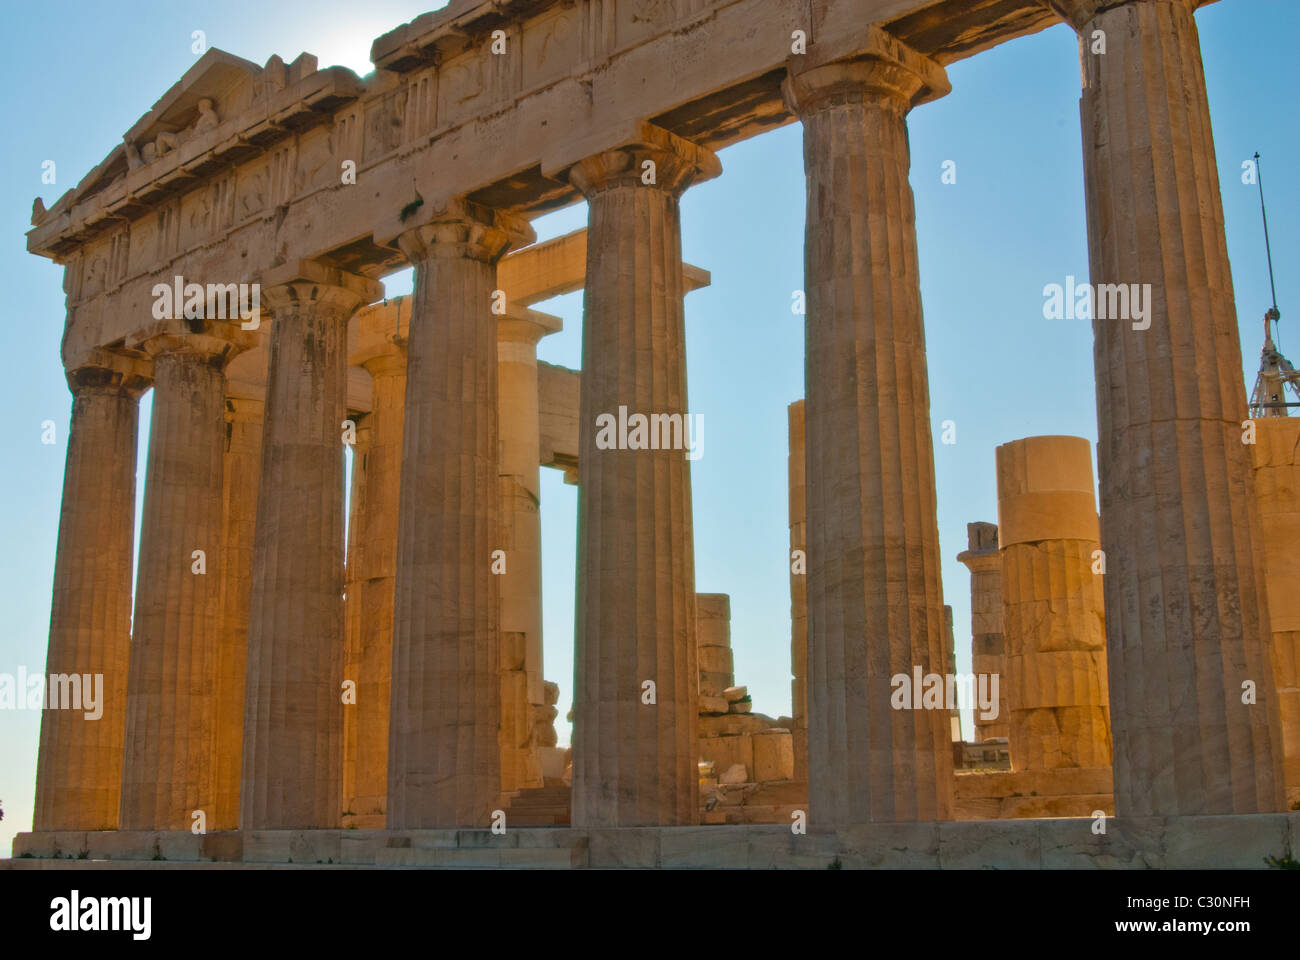 Athens is the capital and largest city of Greece. Athens dominates the Attica periphery and it is one of the world's oldest citi Stock Photo